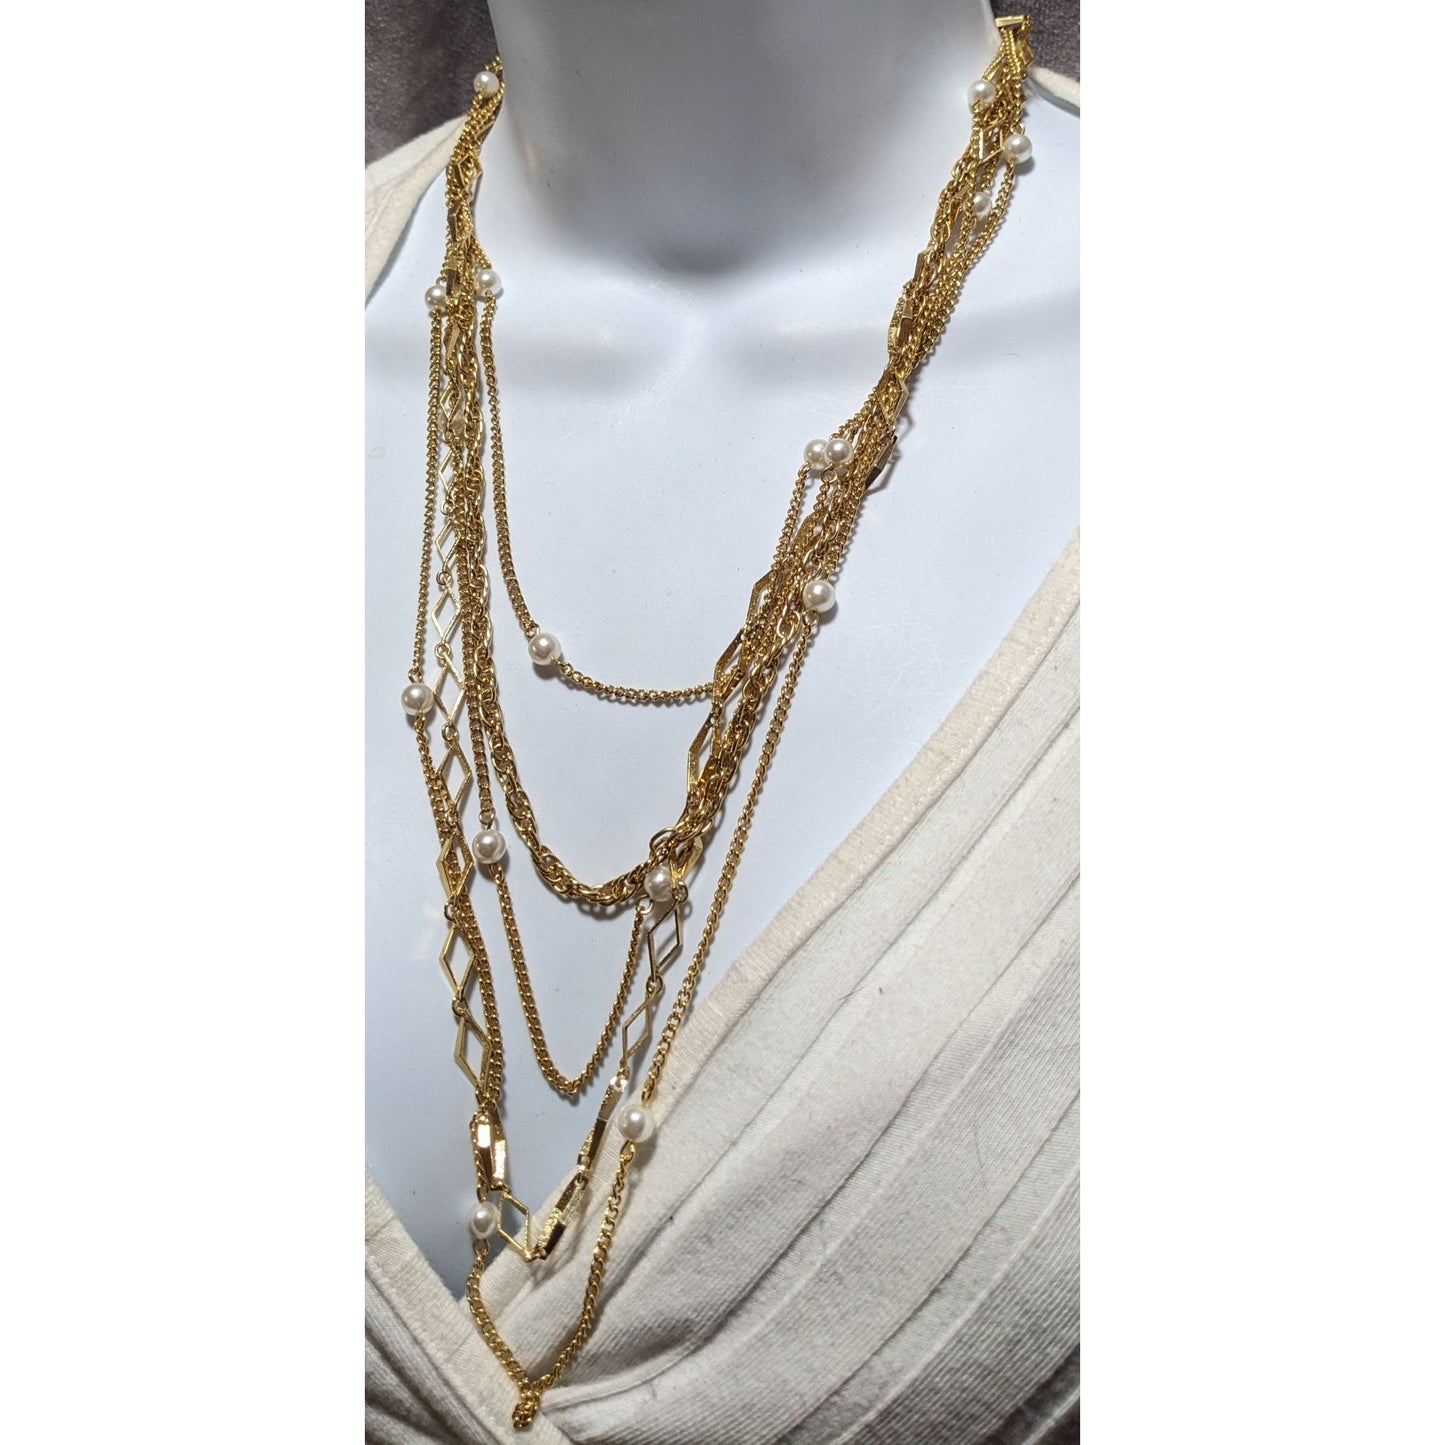 Something Special Gold Glam Multilayer Necklace